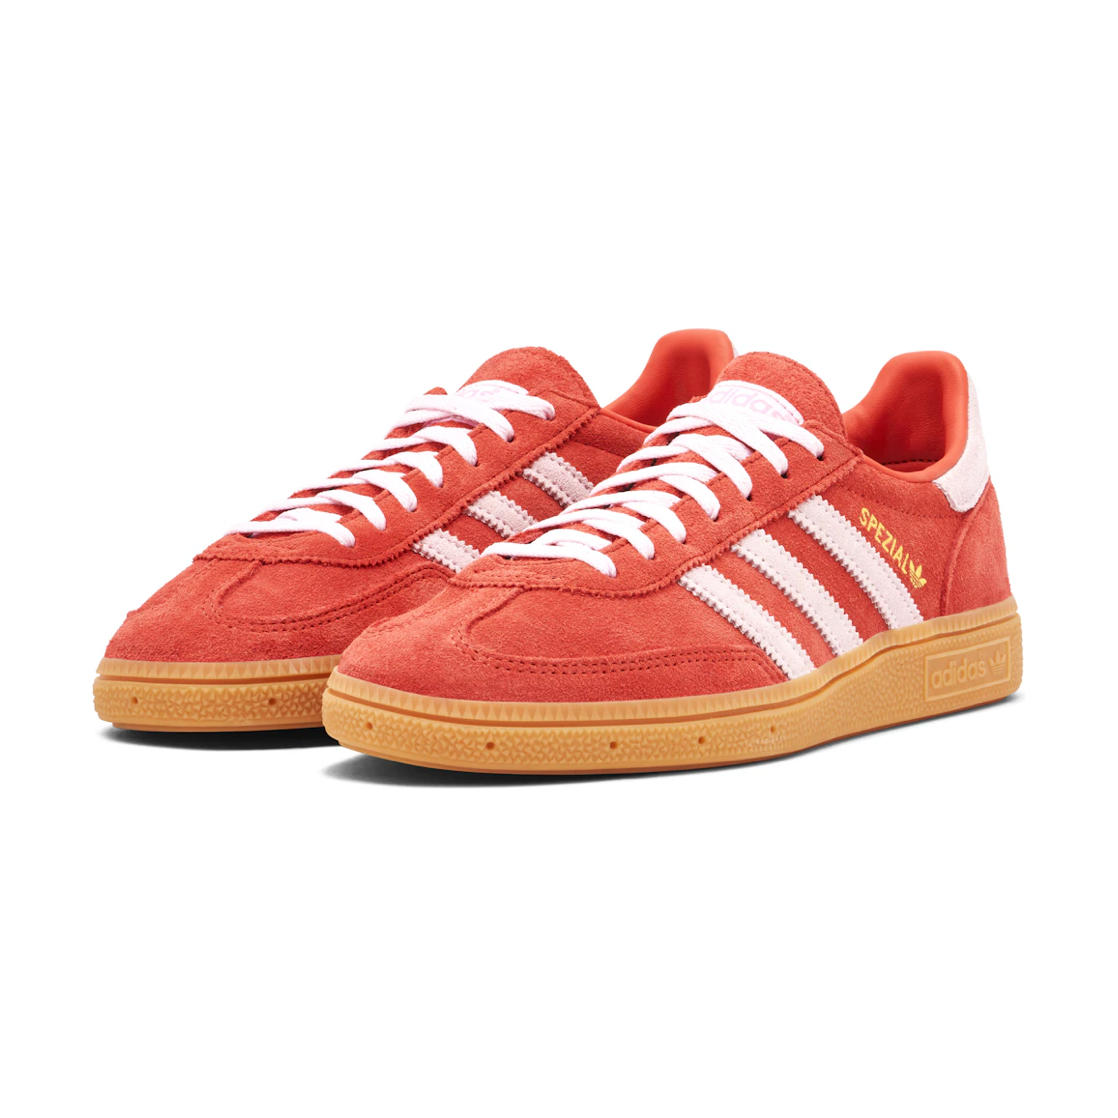 adidas Handball Spezial Bright Red Clear Pink (Women's) by Adidas from £135.00